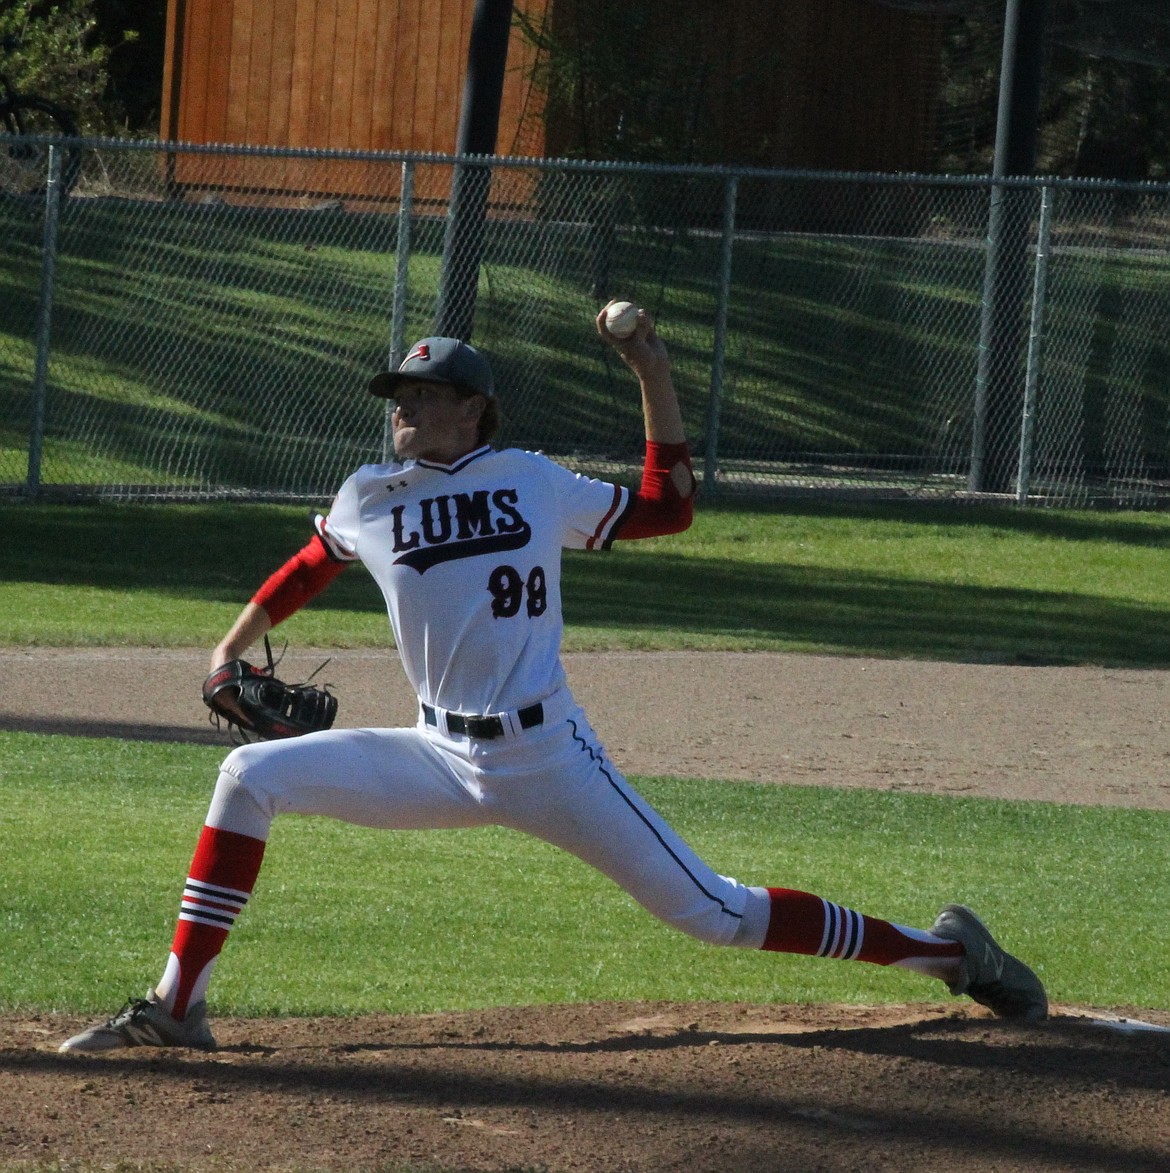 JASON ELLIOTT/Press
Coeur d'Alene Lumbermen pitcher Liam Paddack fires a strike during Thursday's game against Lewis-Clark at Thorco Field. Paddack struck out 12 in 4 1/3 innings.